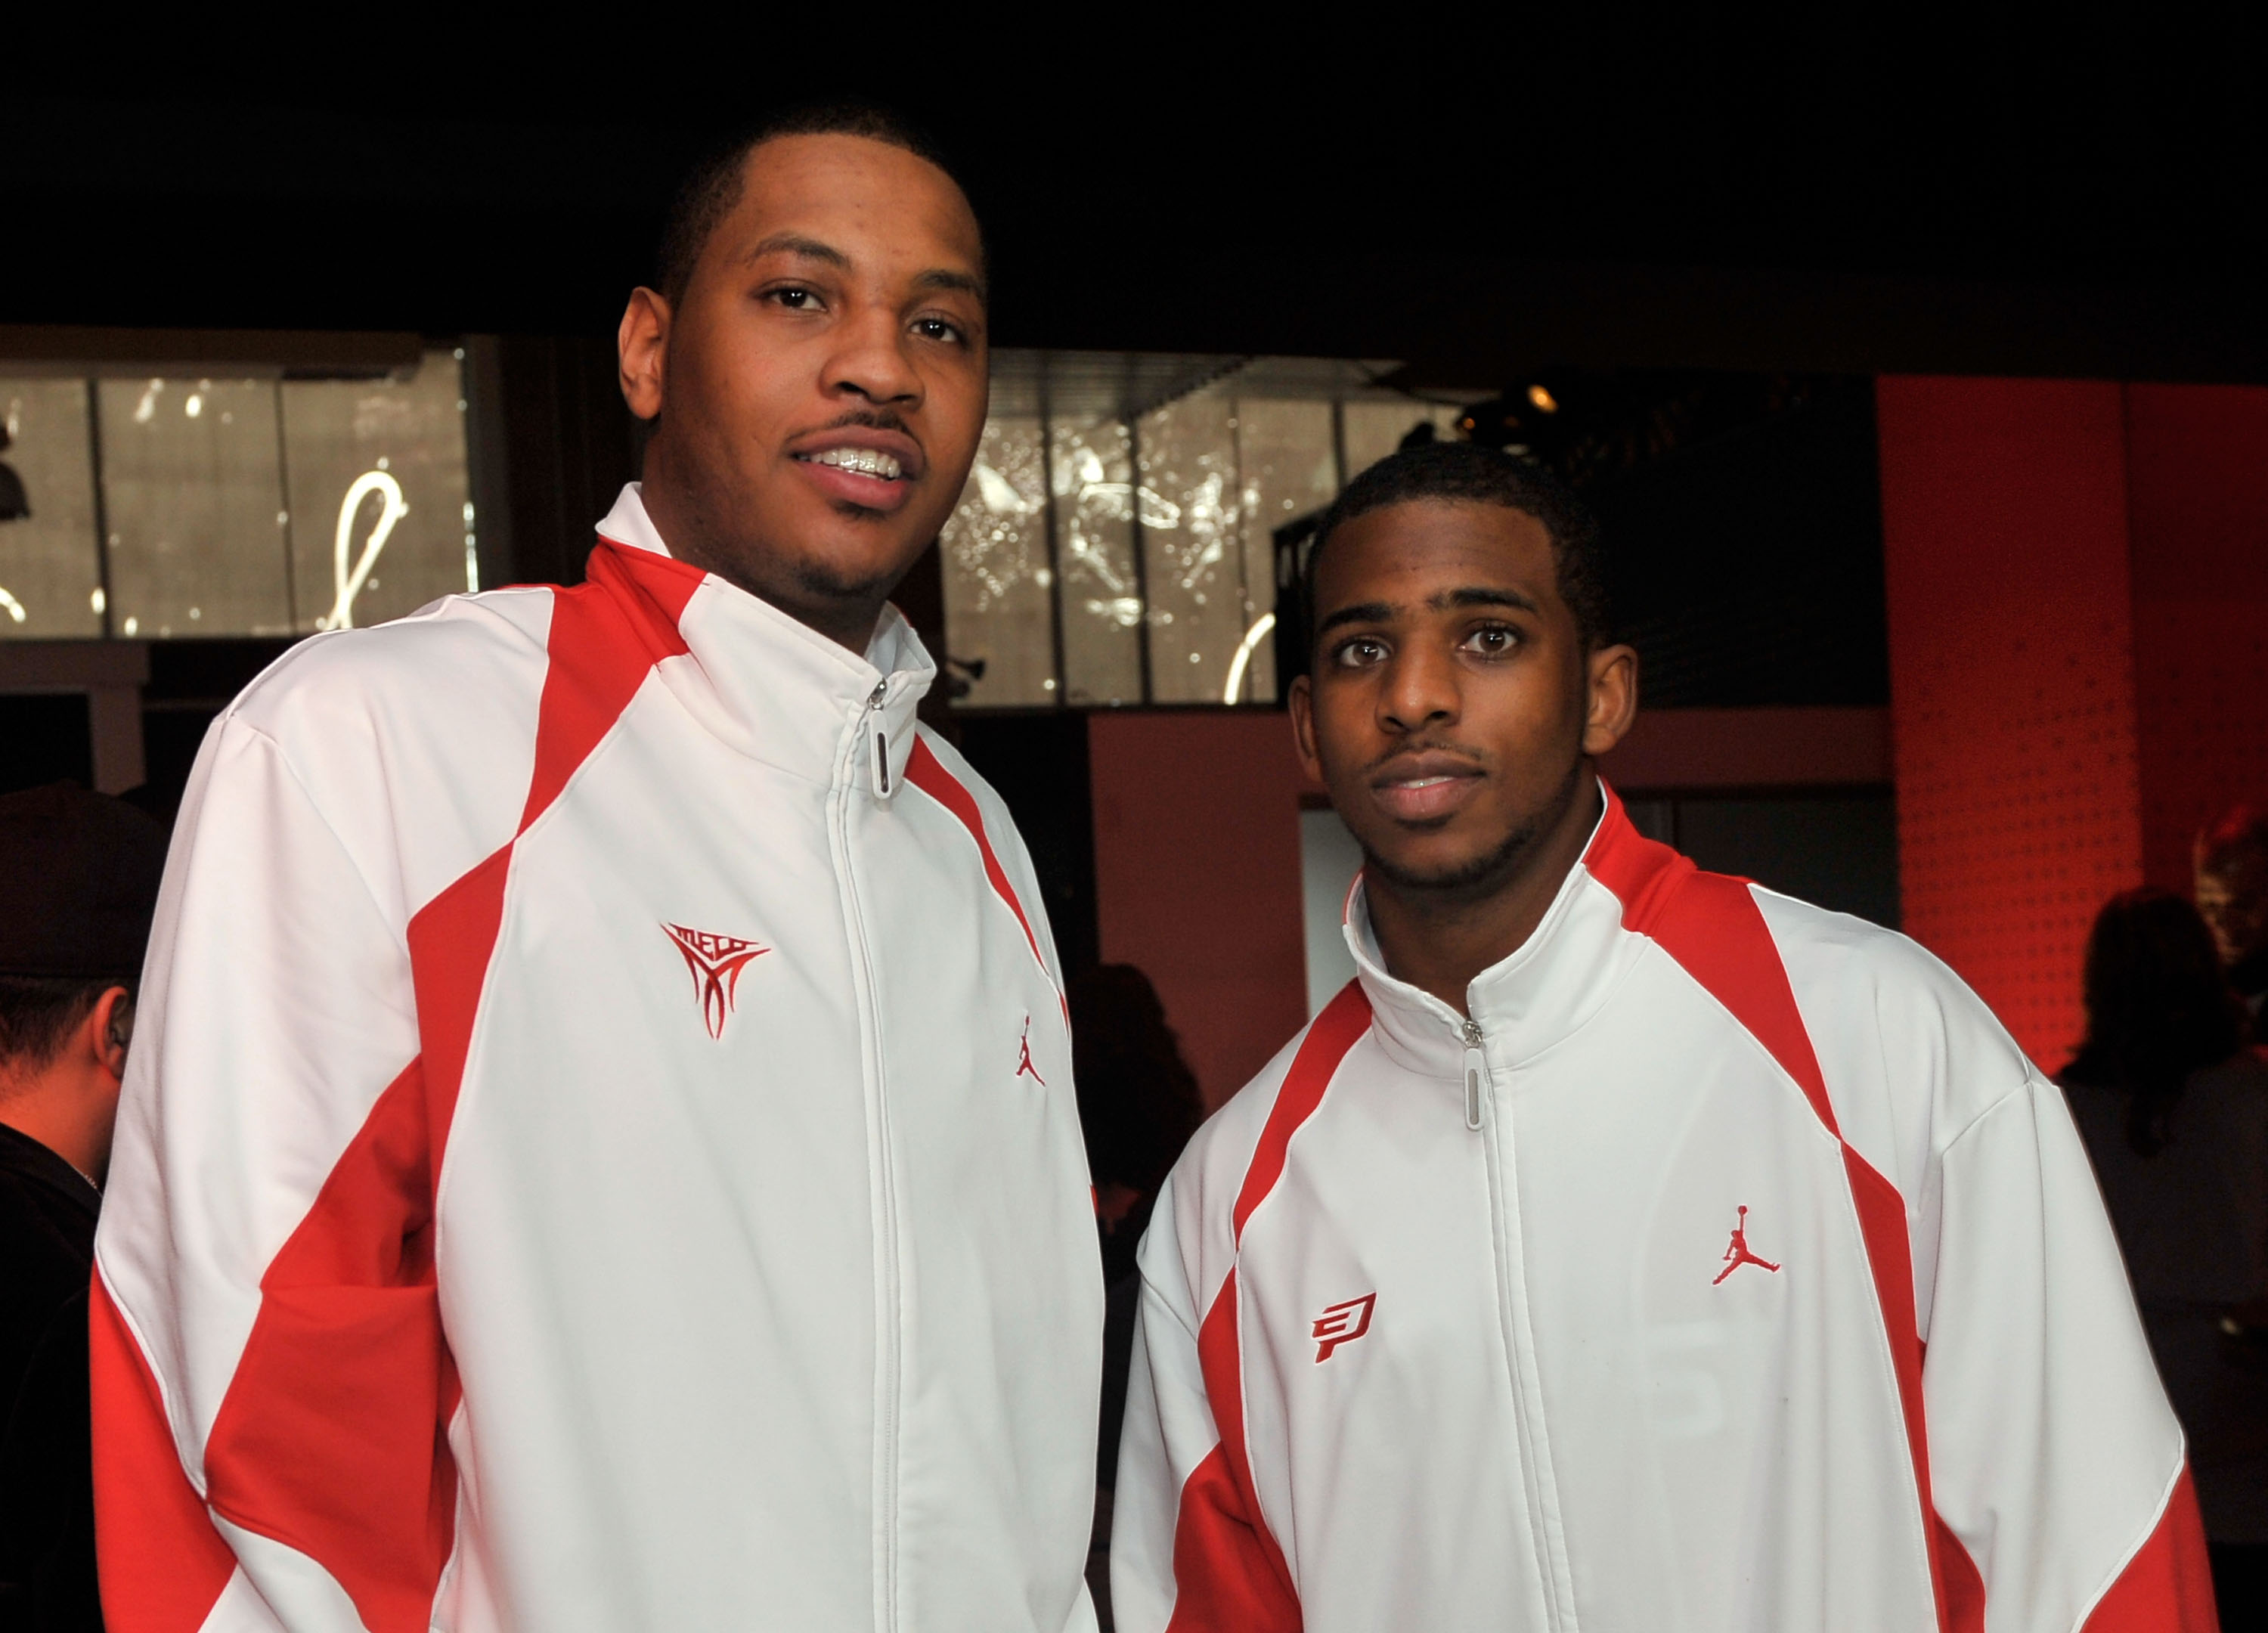 DALLAS - FEBRUARY 13: NBA players Carmelo Anthony (L) and Chris Paul attend the 23/25 Energy Space presented by Jordan Brand in Dallas, Texas on Februrary 13, 2010. (Photo by Charley Gallay/Getty Images for Jordan Brand)